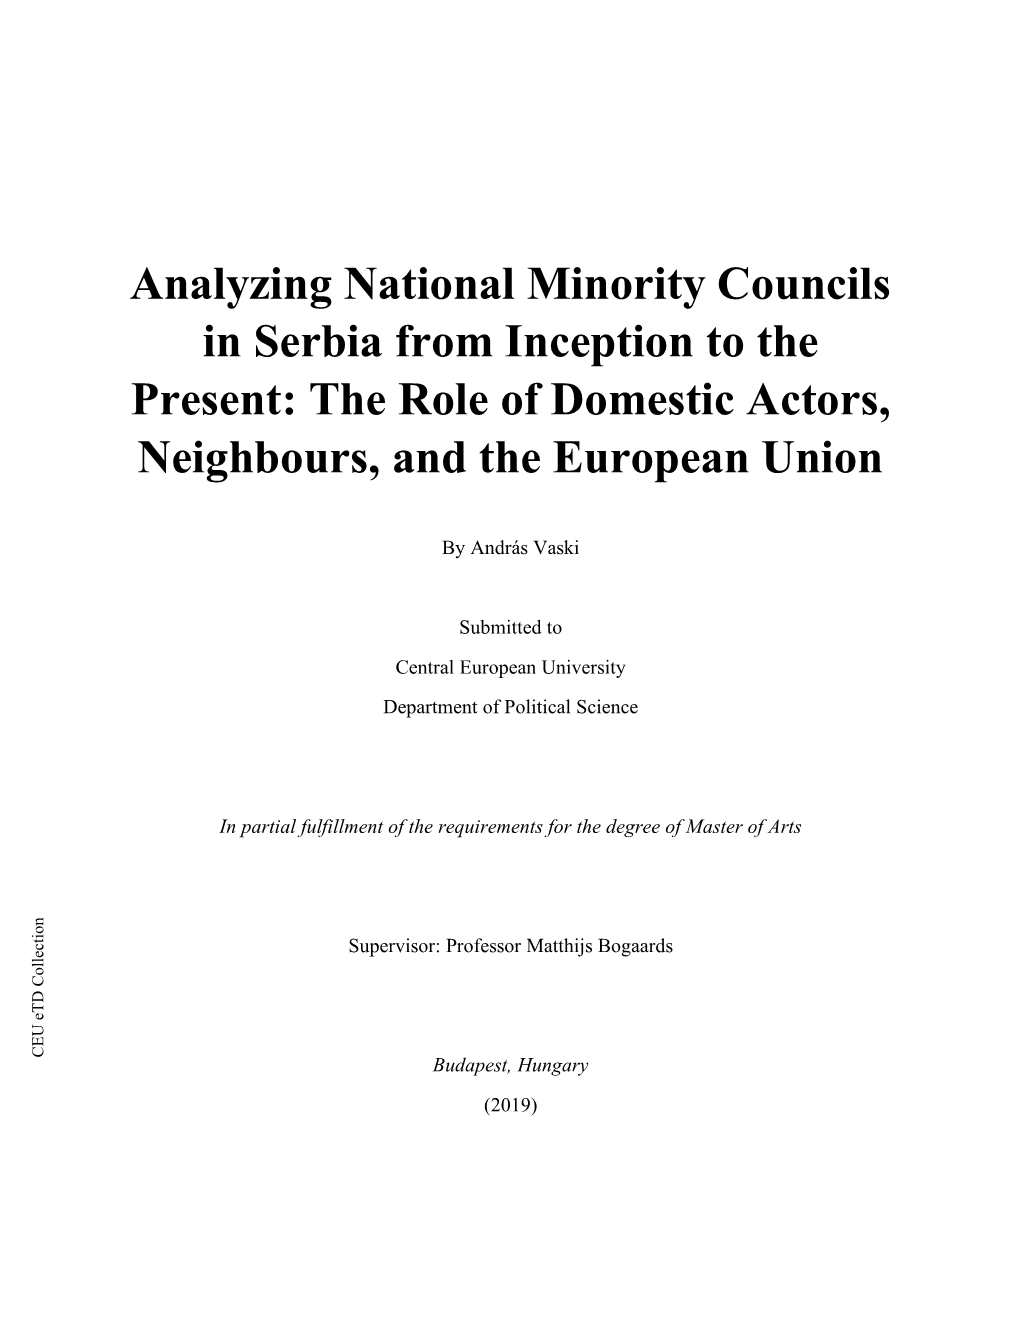 Analyzing National Minority Councils in Serbia from Inception to the Present: the Role of Domestic Actors, Neighbours, and the European Union